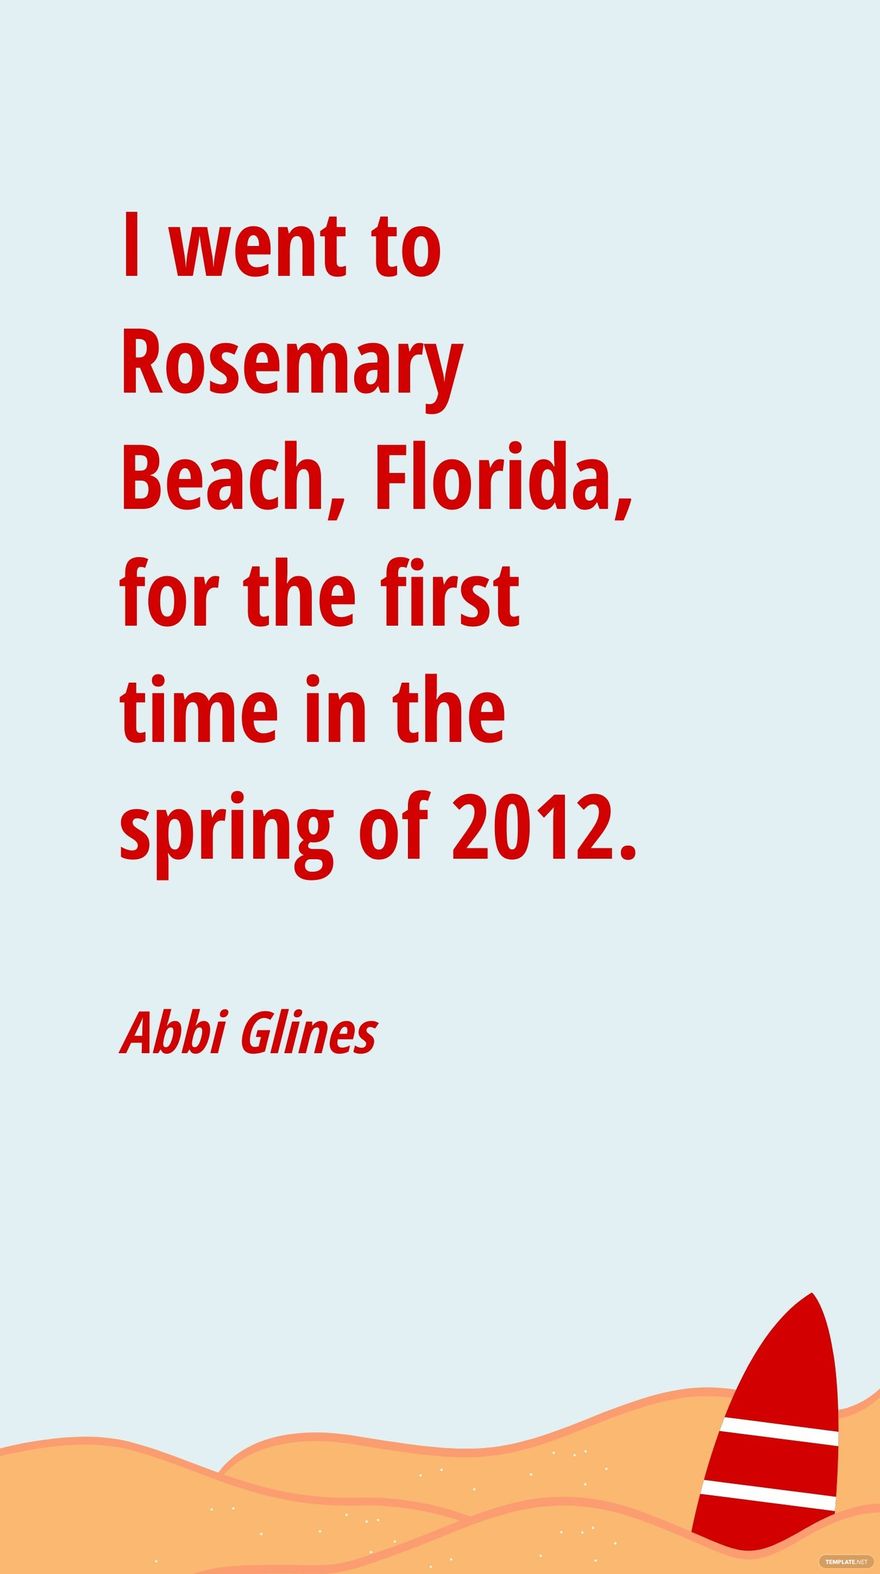 Abbi Glines - I went to Rosemary Beach, Florida, for the first time in the spring of 2012. in JPG